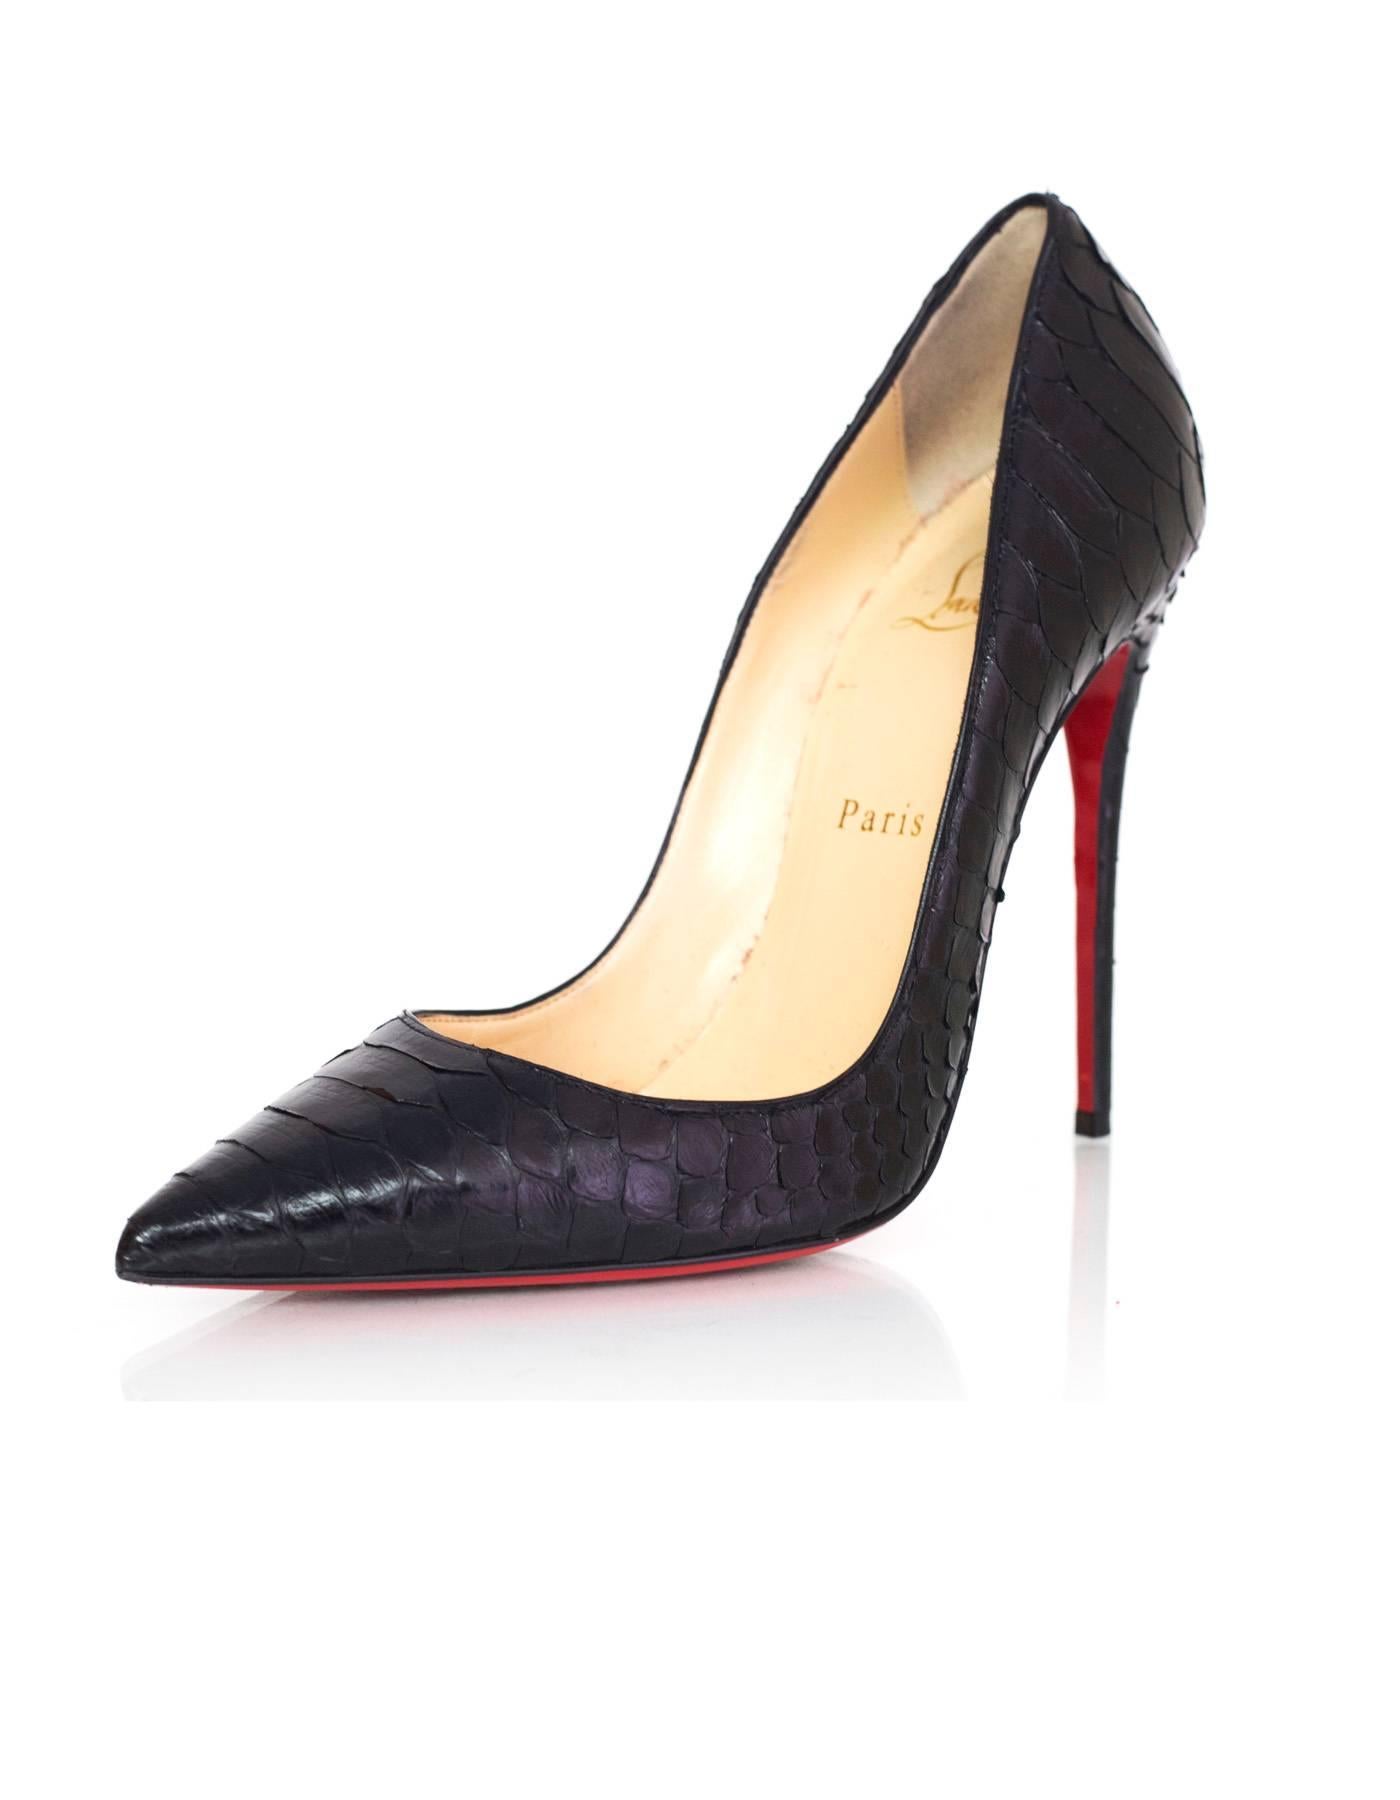 Christian Louboutin Black Python So Kate Pumps Sz 37.5

Made In: Italy
Color: Black
Materials: Python
Closure/Opening: Slide on
Sole Stamp: Christian Louboutin Made in Italy 37.5
Overall Condition: Excellent pre-owned condition with the exception of